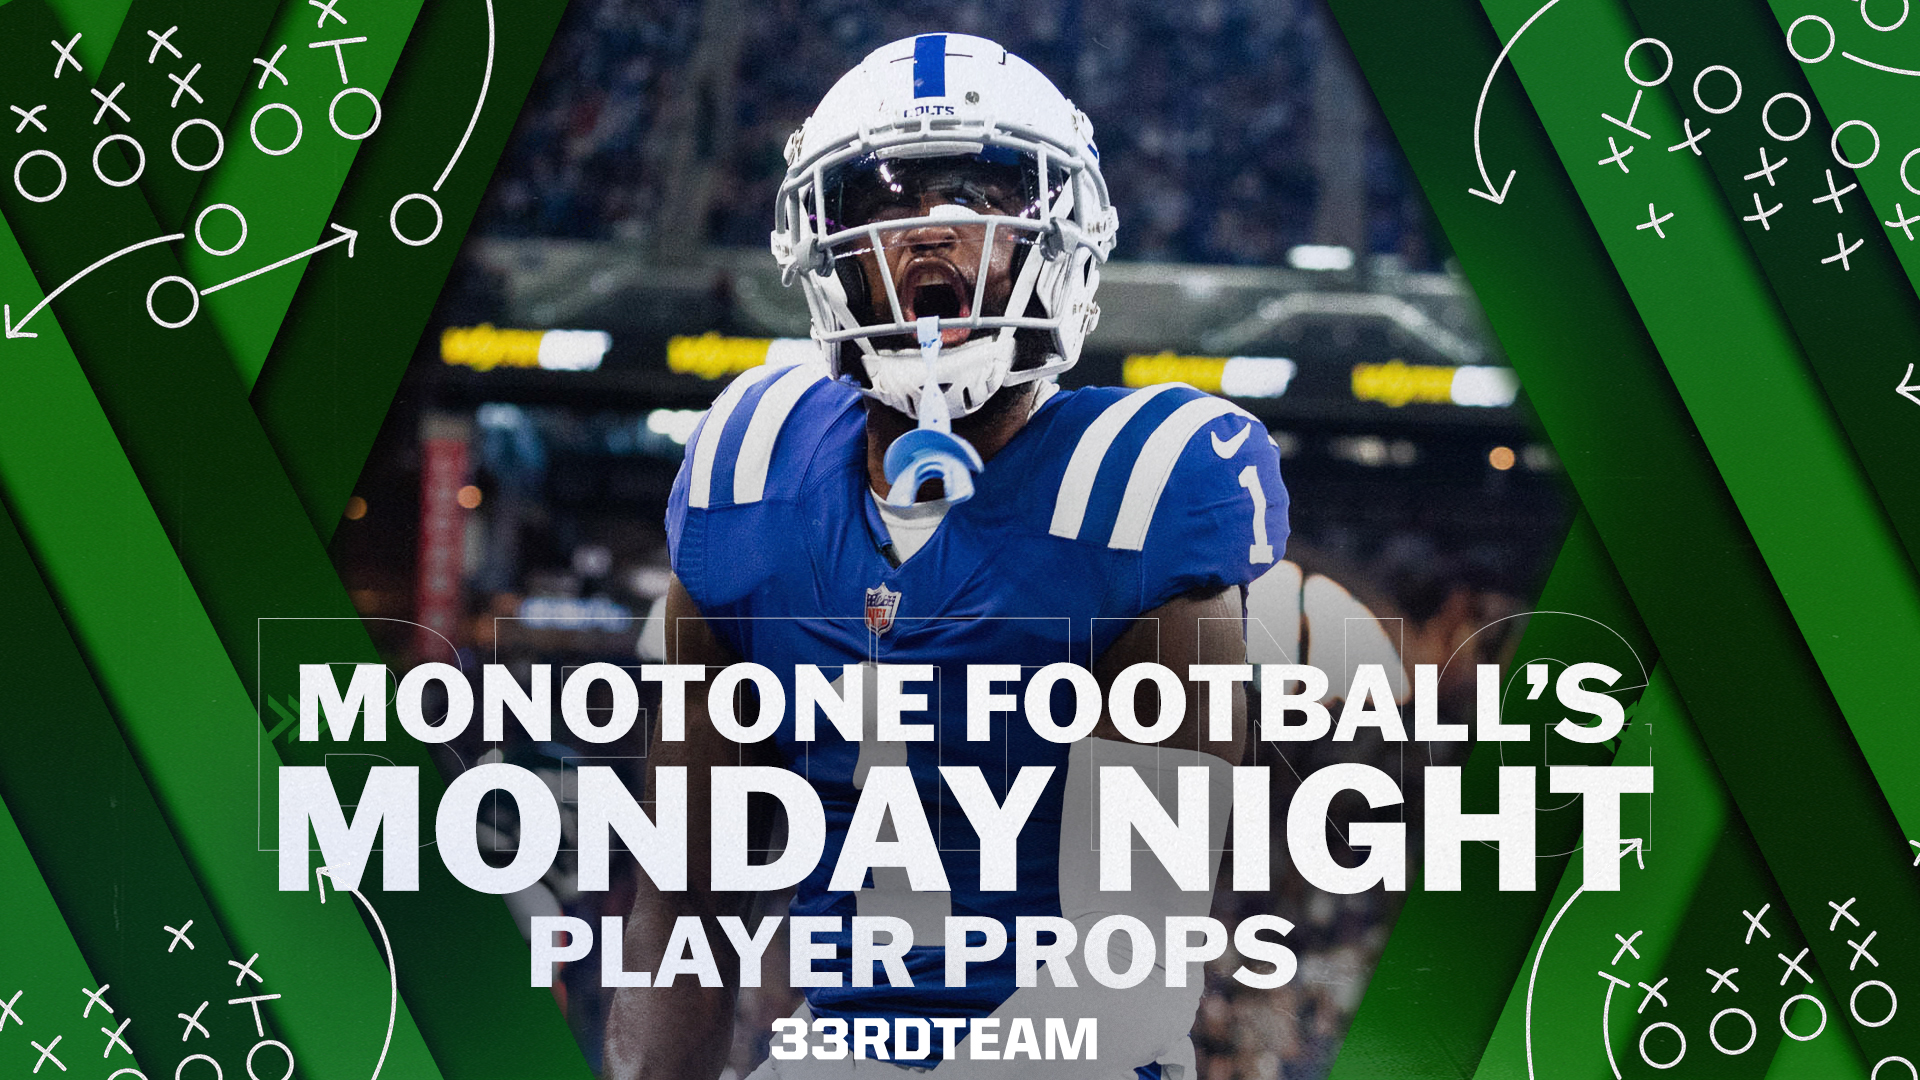 Monotone’s Monday Night Football Player Prop for Steelers vs. Colts